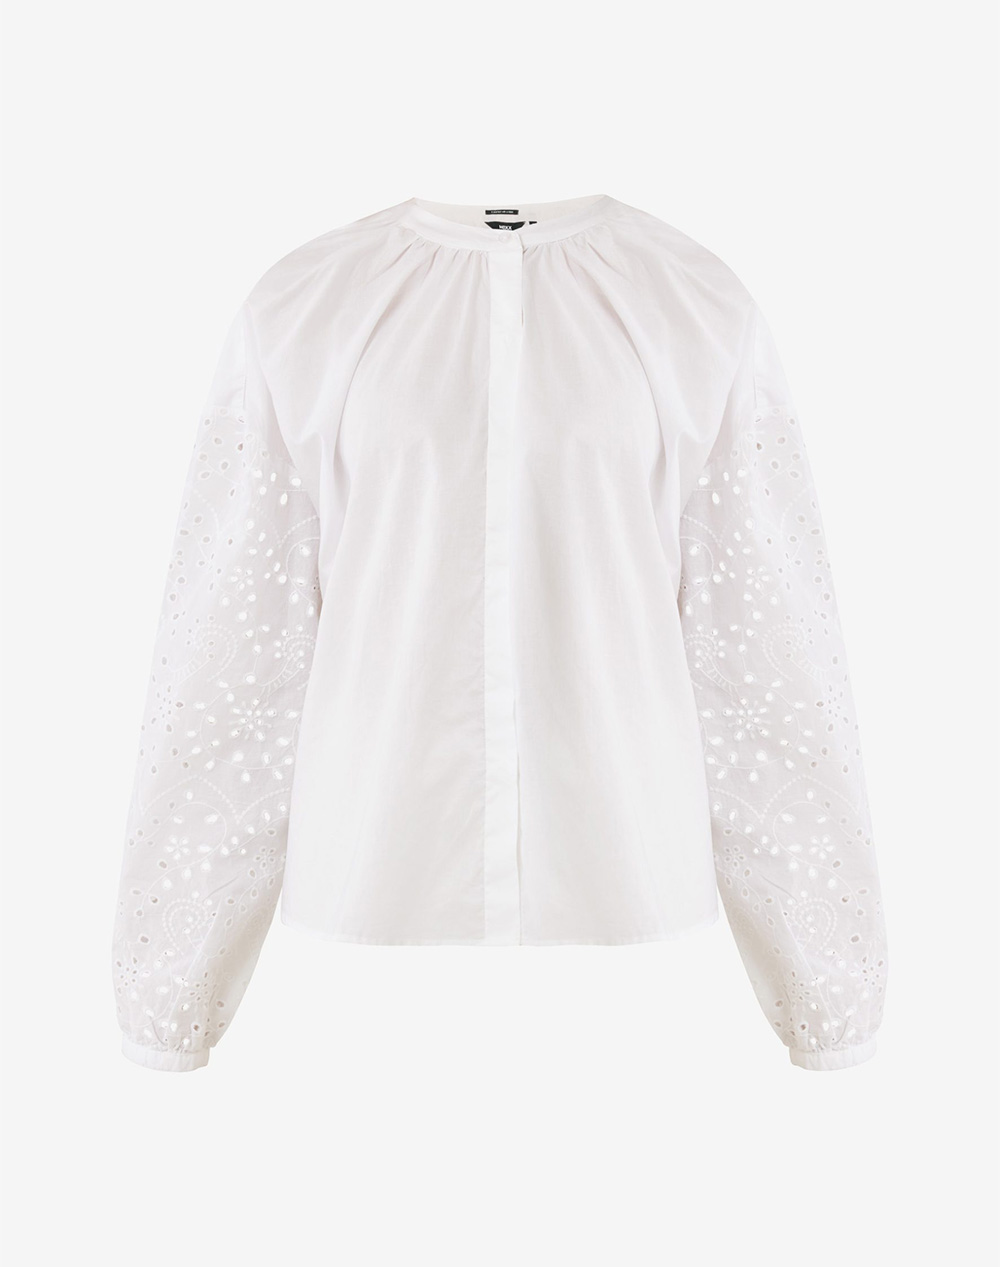 MEXX Blouse with embroidery sleeves and back MF006103041W-110602 OffWhite